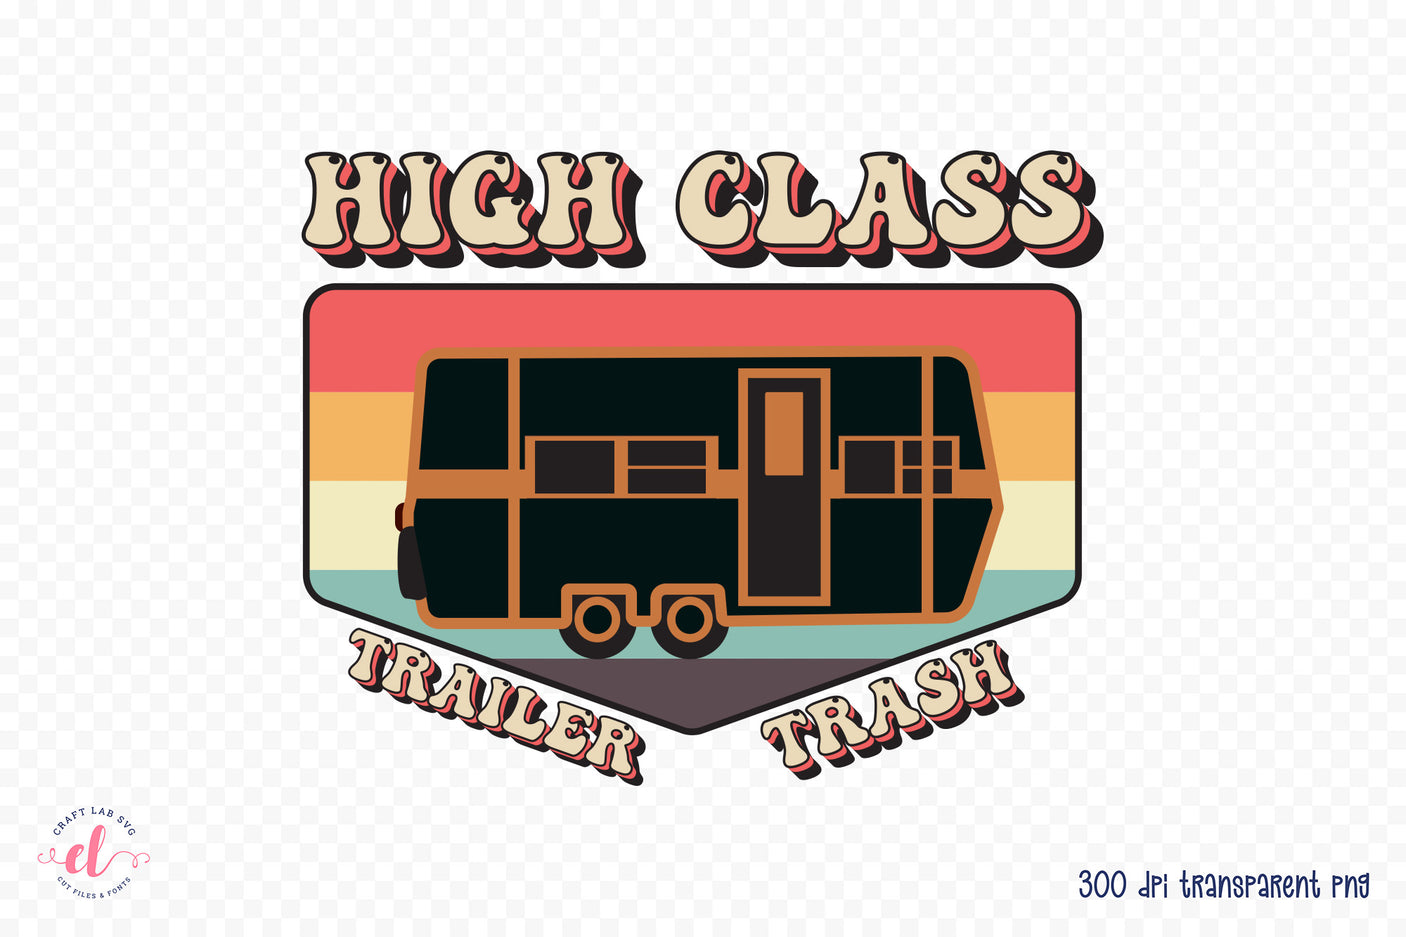 Retro Camping Sublimation, High Class Trailer Trash PNG